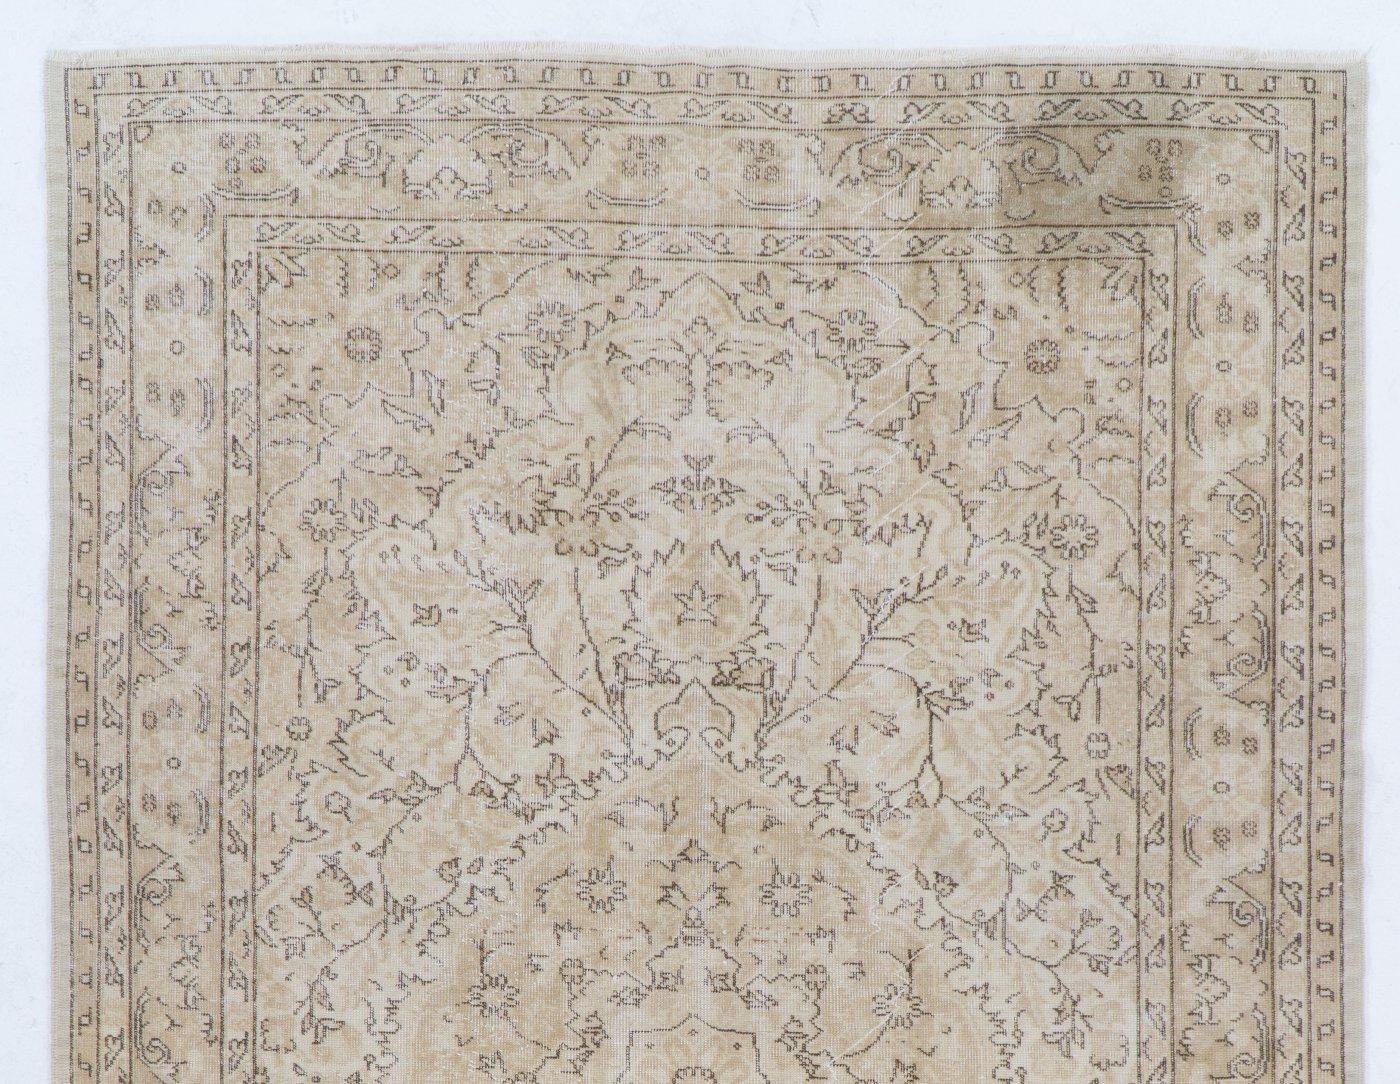 A finely hand-knotted vintage Turkish rug from the 1960s featuring a delicate all-over design of floral and leafy vines that look as though they are stenciled in a subtle, neutral color palette of cream, sand beige and brown. The rug has even low